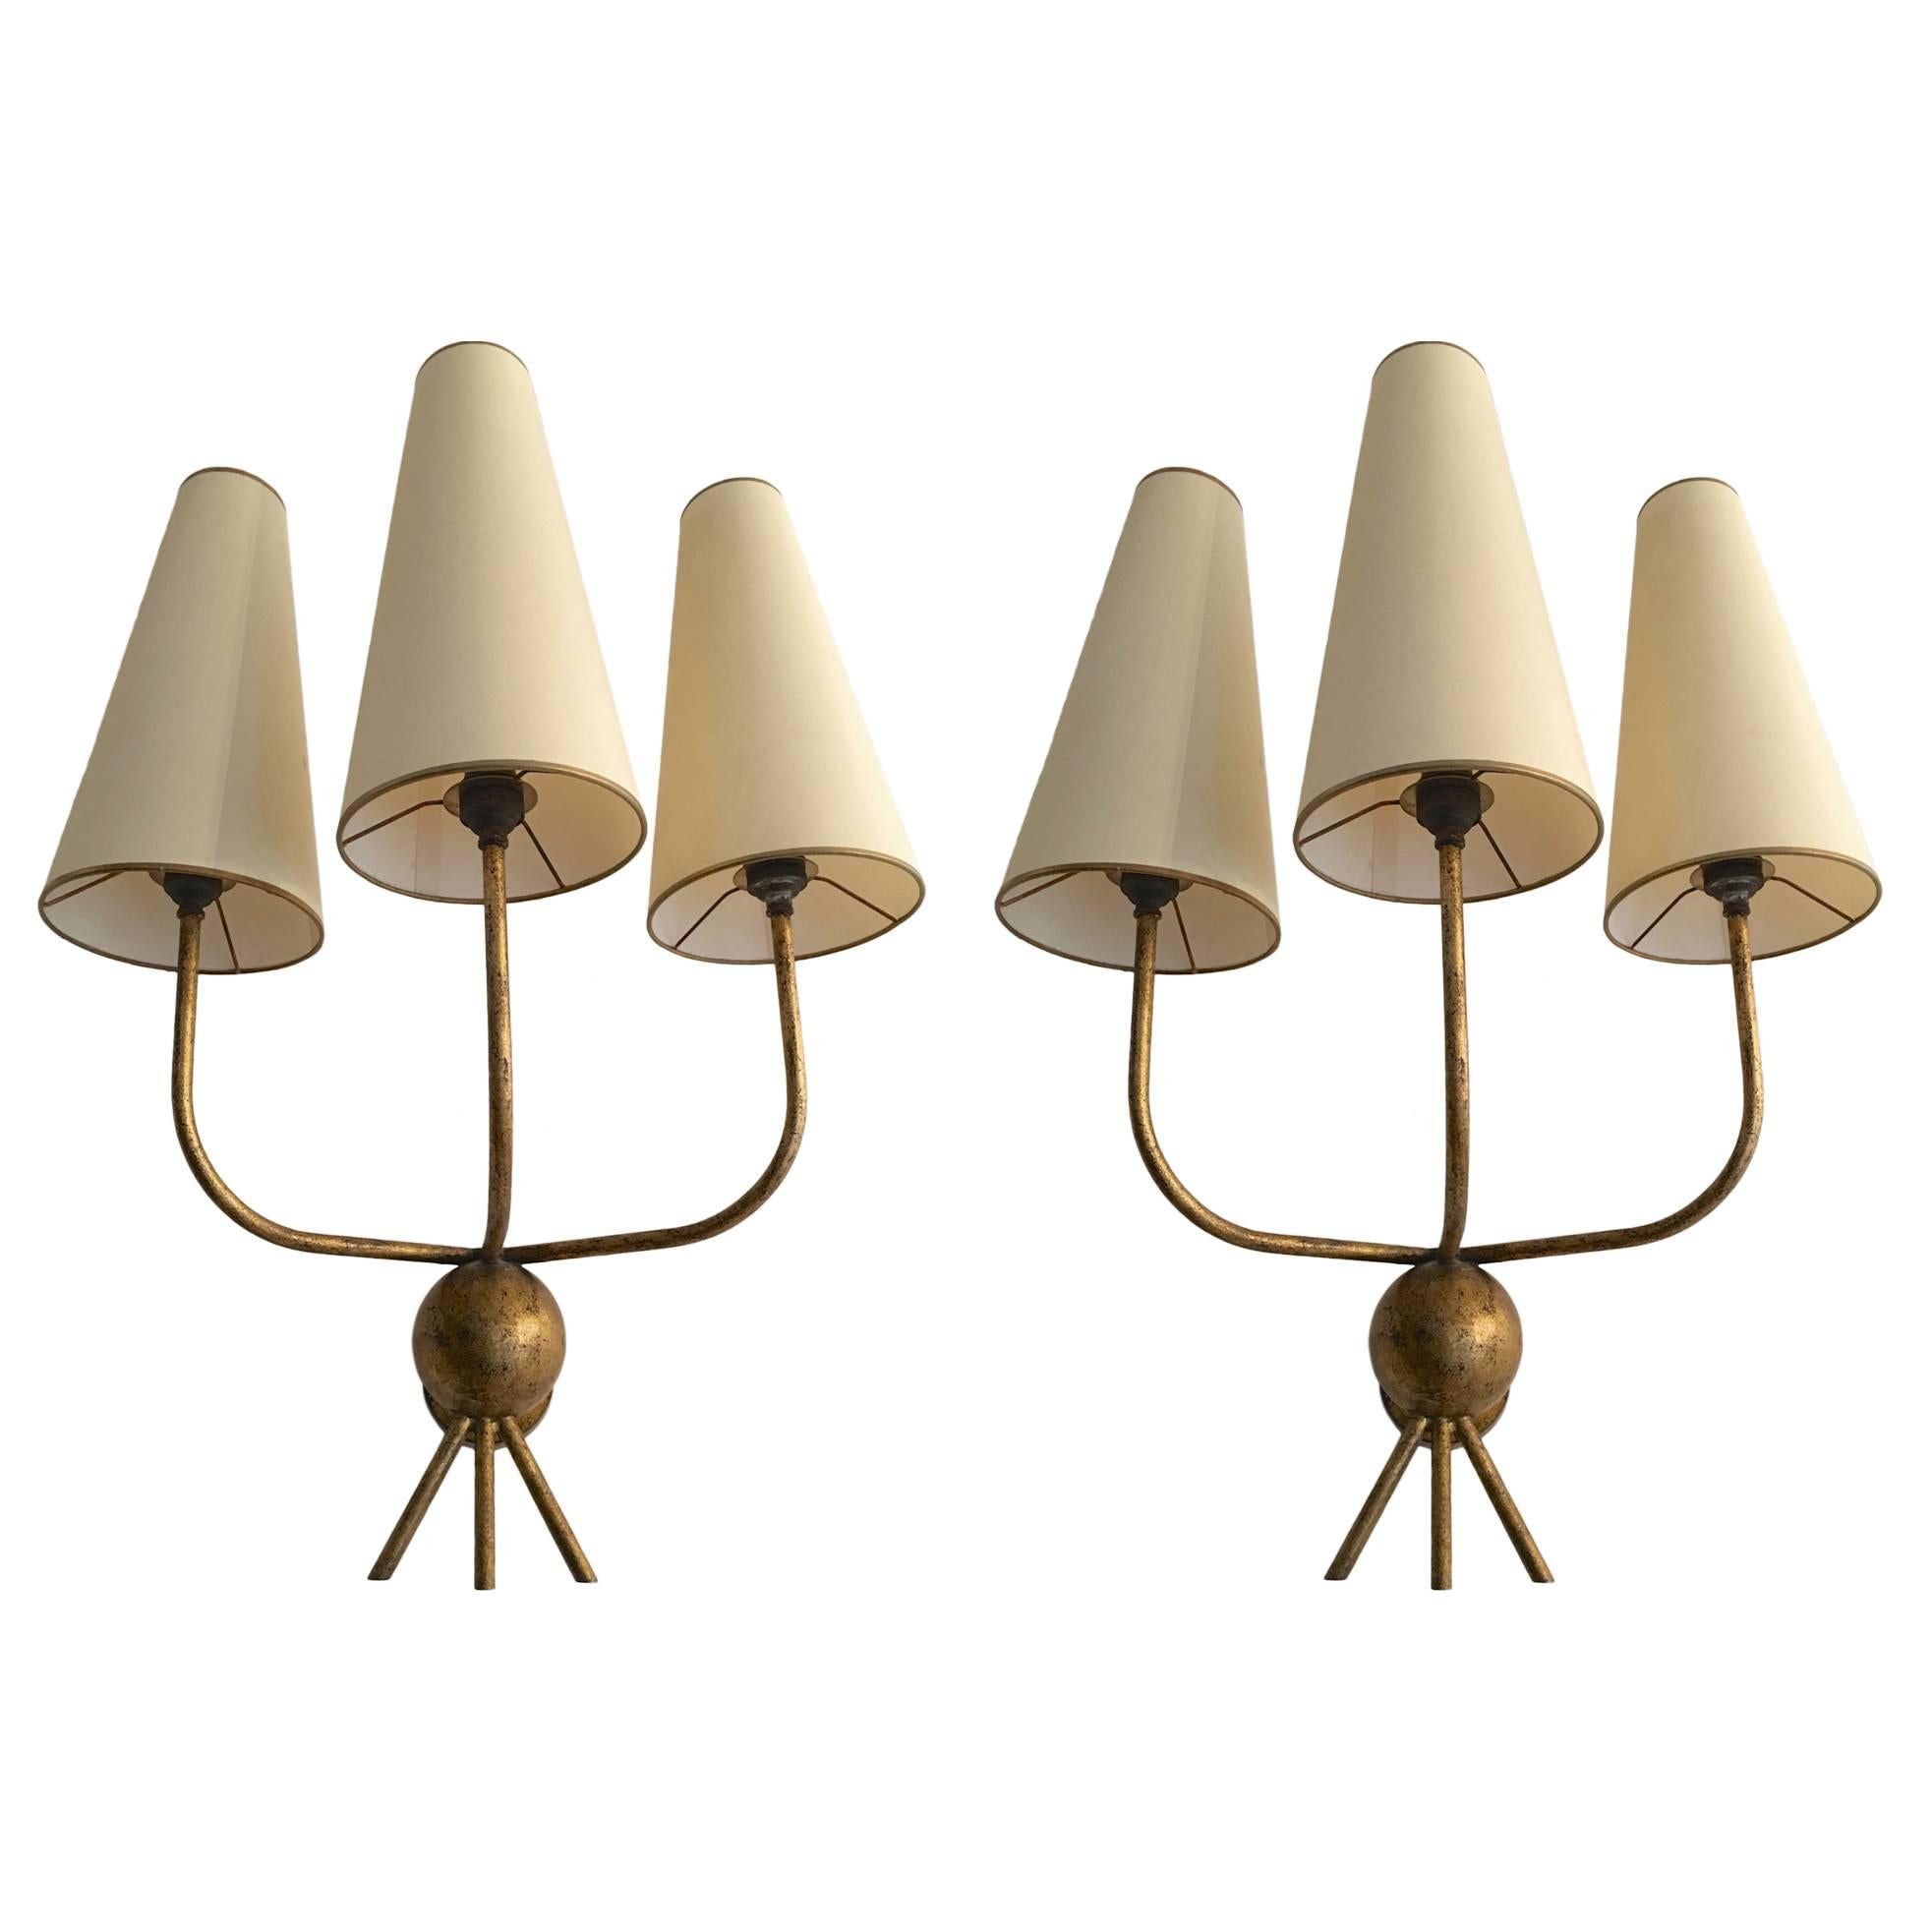 Jean Royère Pair of Gold Leaf Wrought Iron Sconces, Model "Hirondelle" For Sale